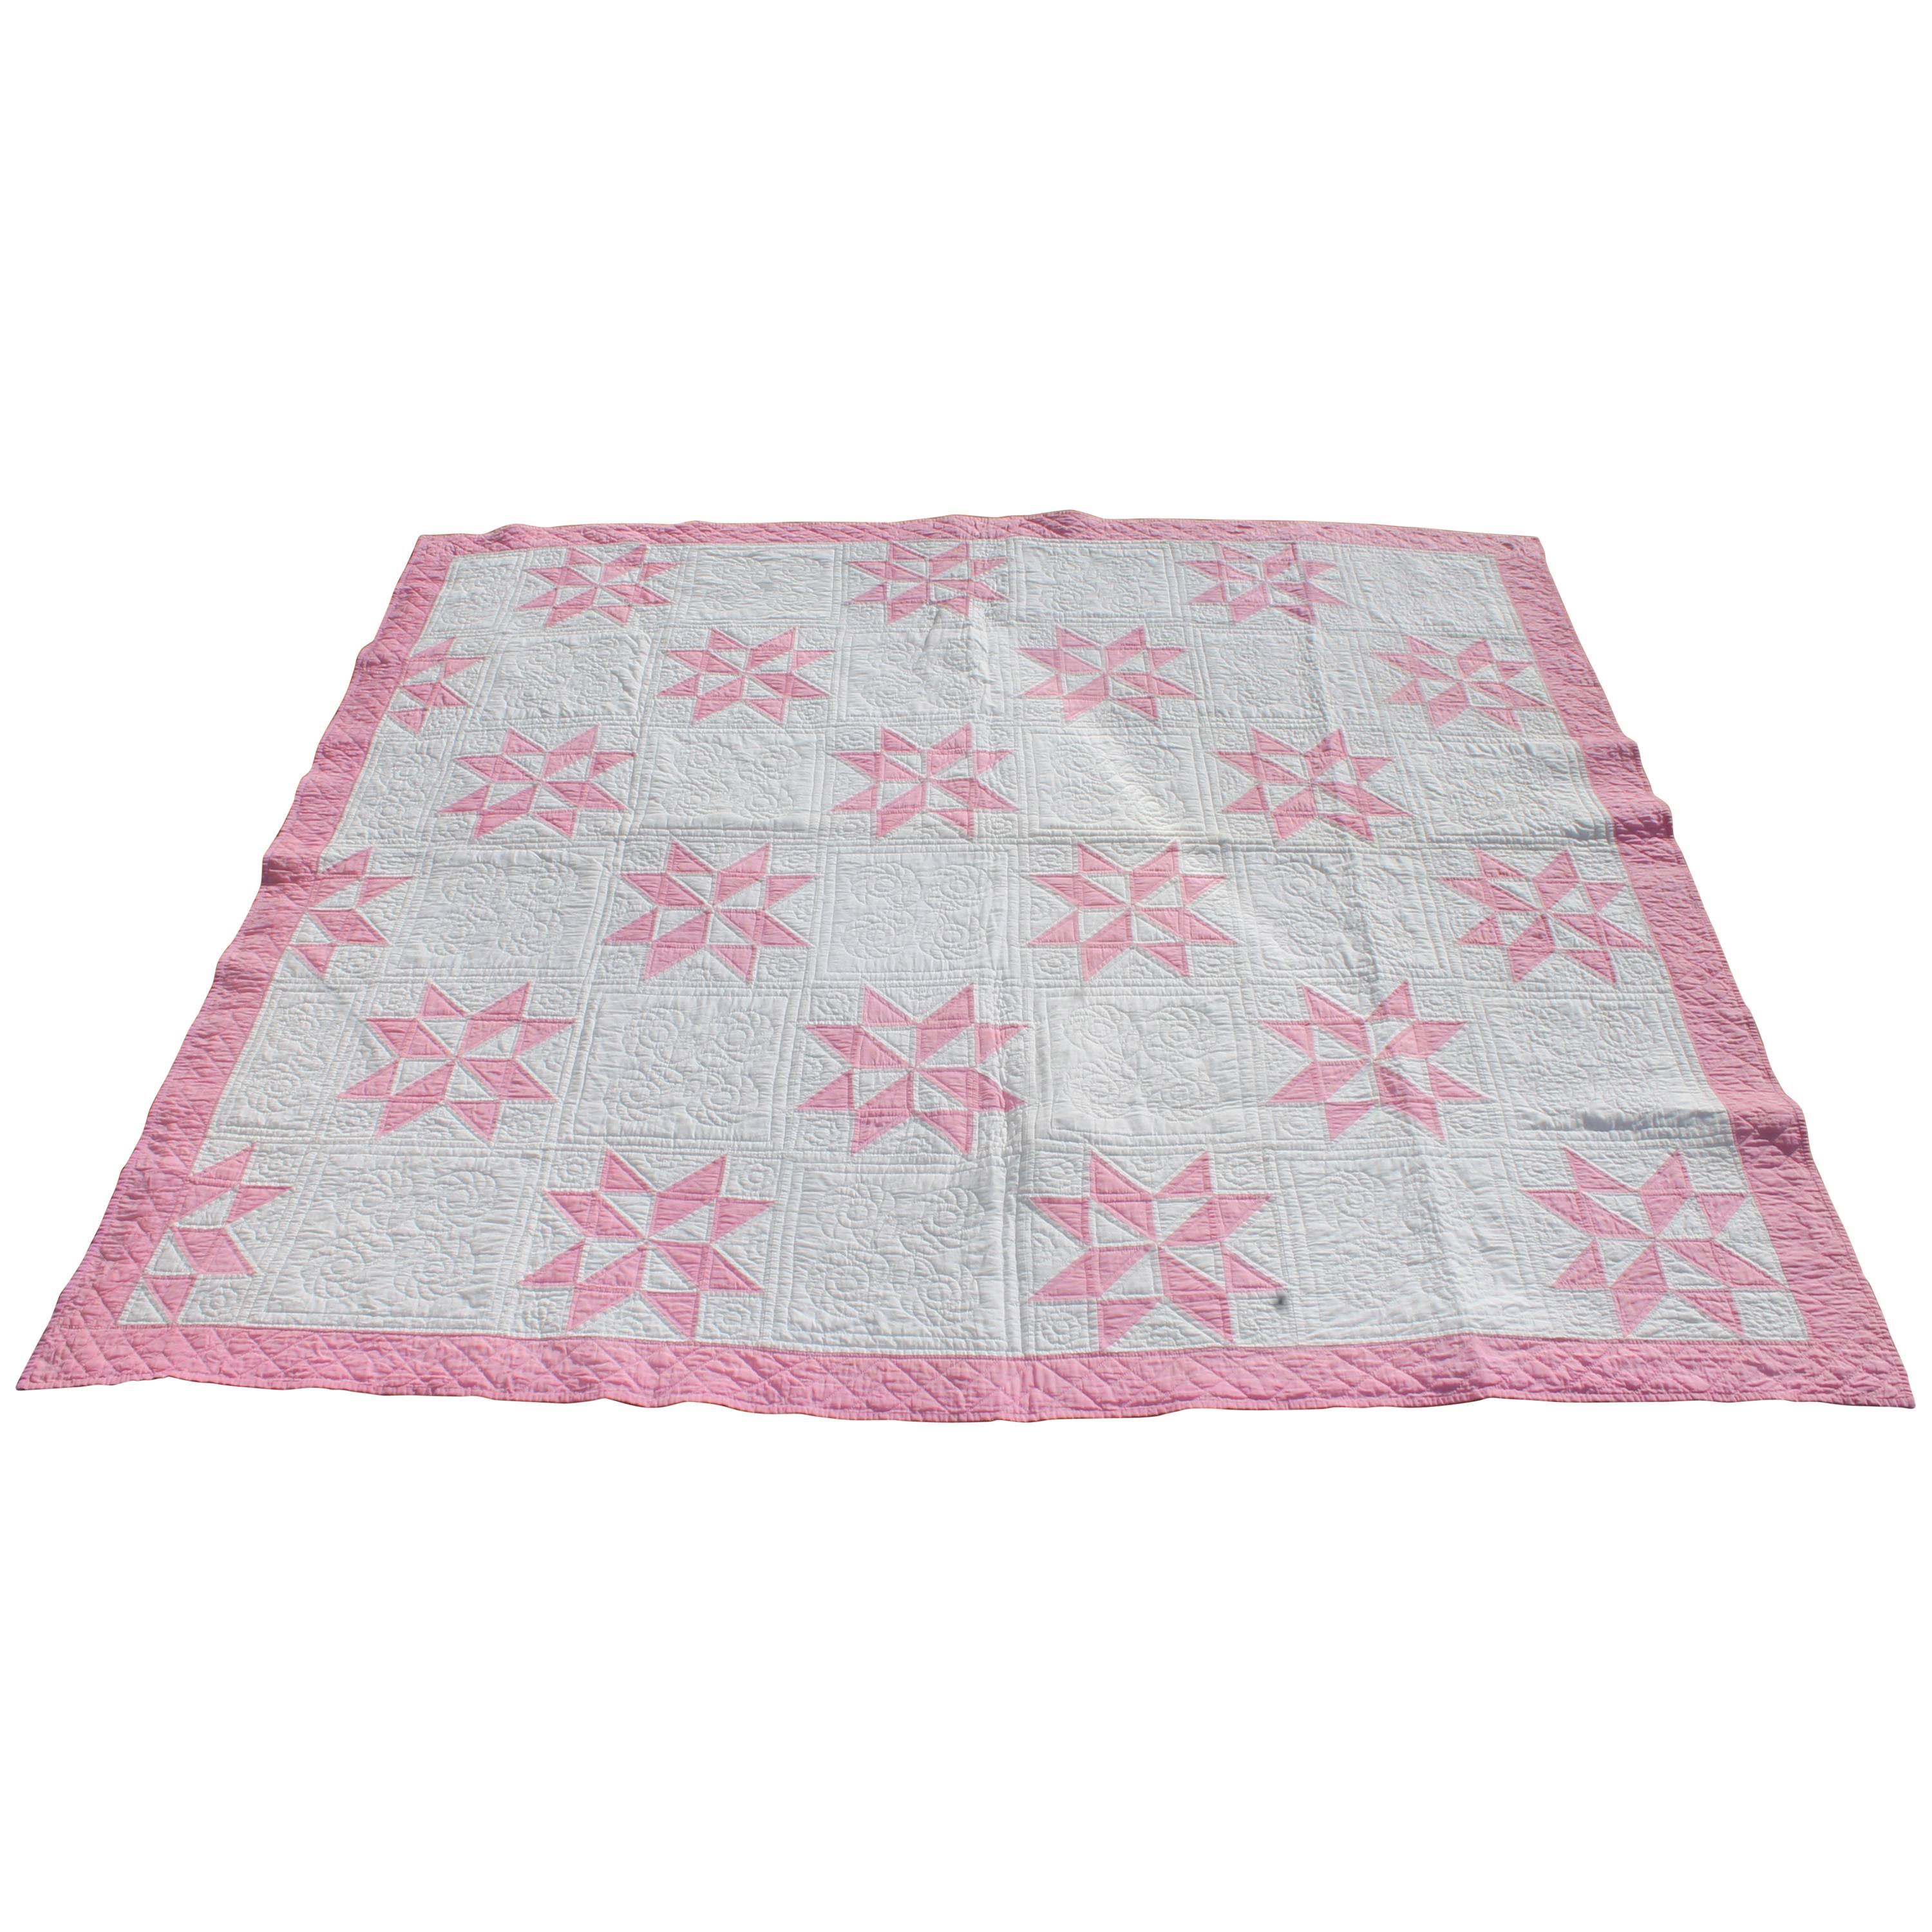 19th Century Star Quilt in Dusty Rose